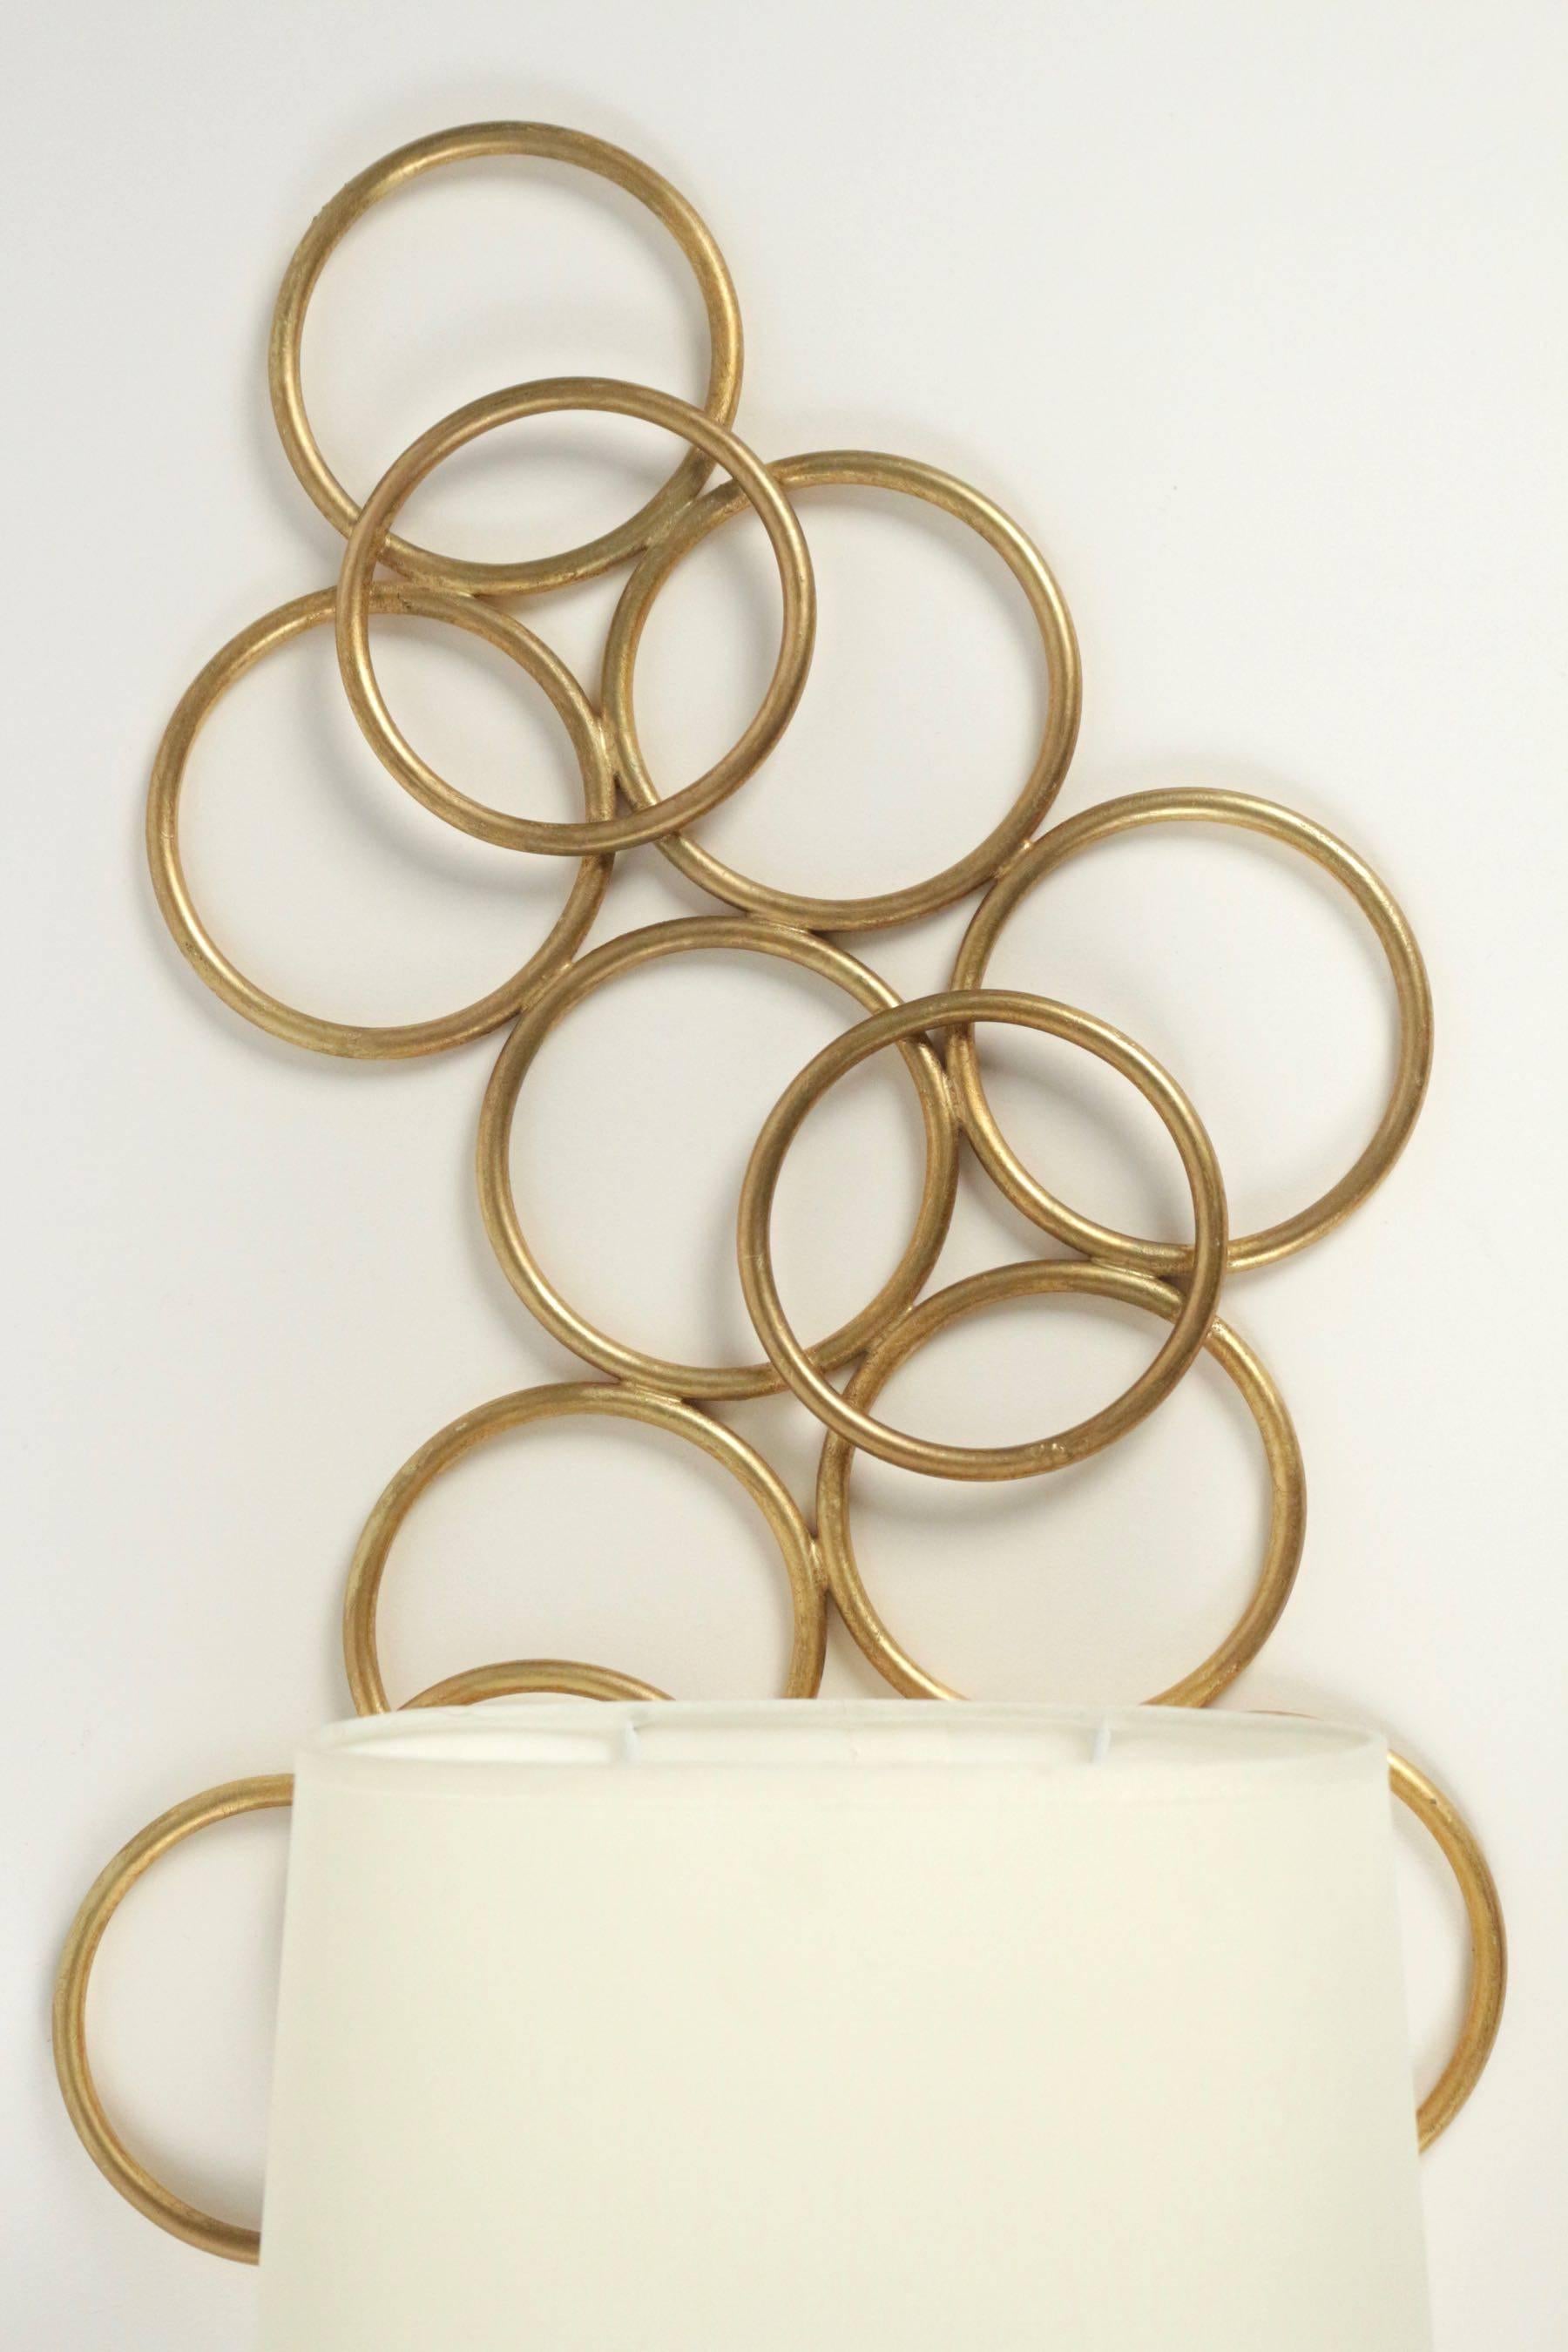 1970s pair of Maison Honore sconces.

Made of intertwined circles, made of gilded metal.
Oval lampshade made of off-white cotton.

One bulb per sconce.